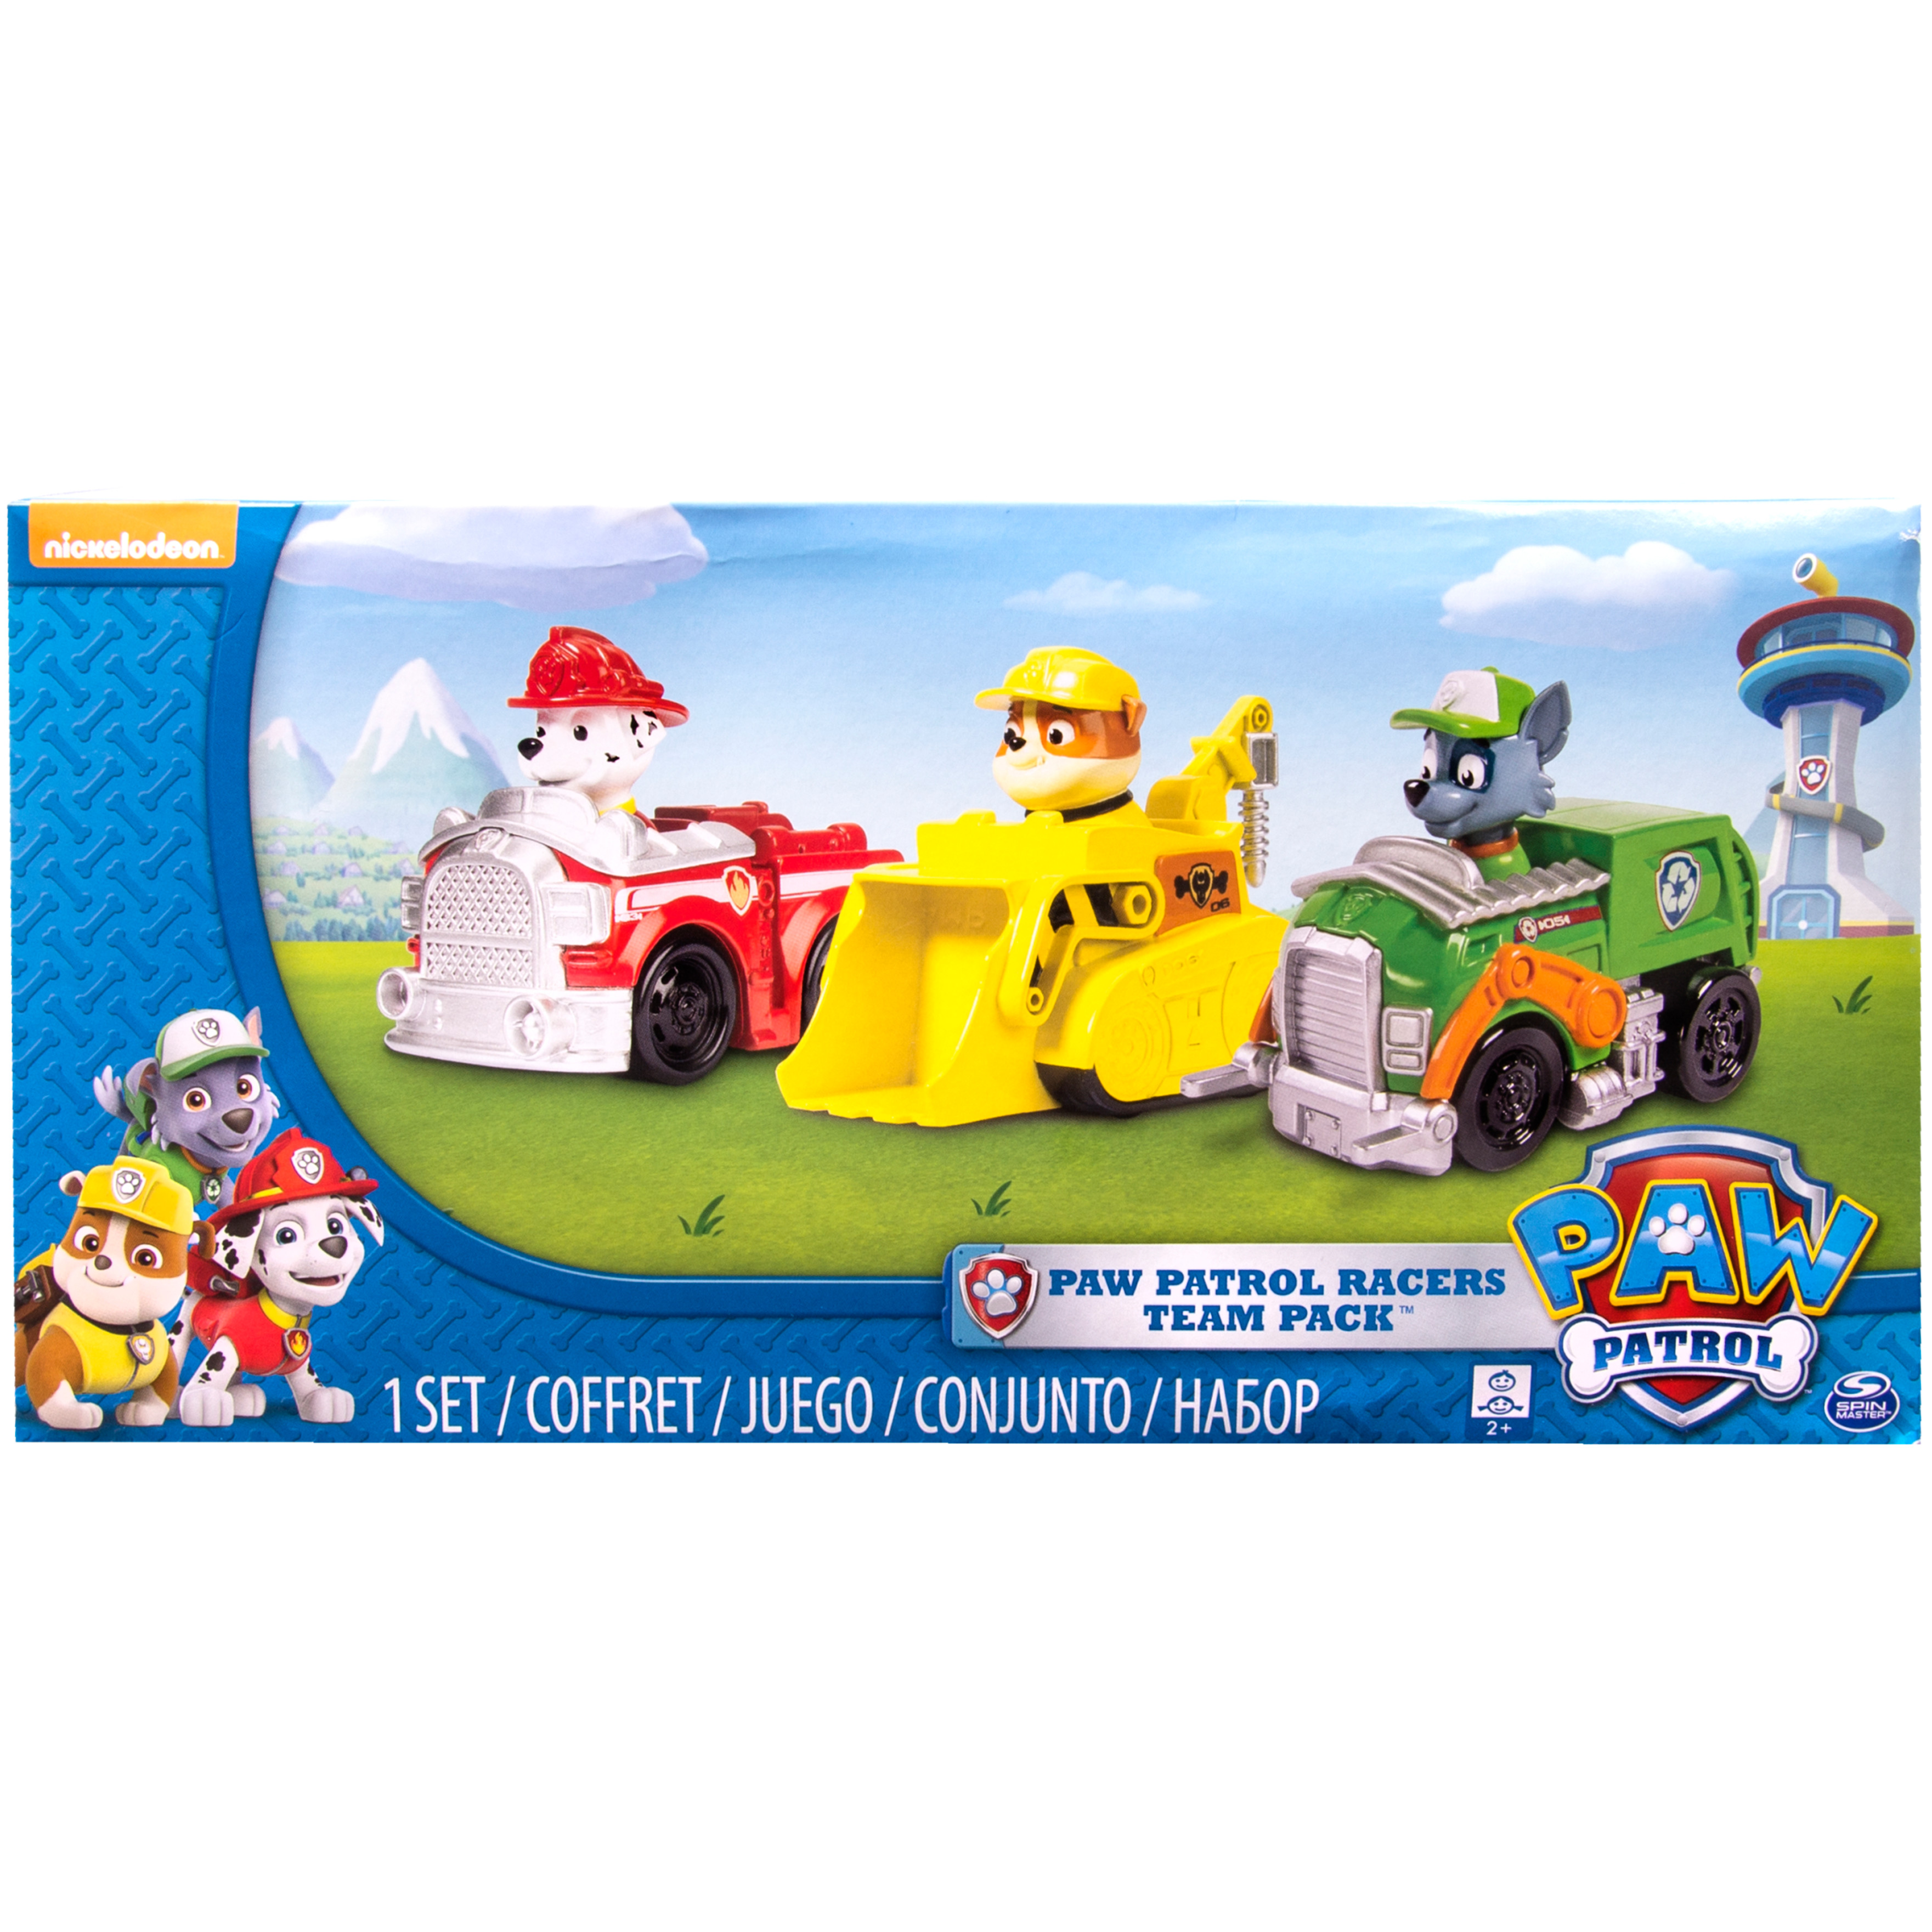 PAW Patrol Rescue Racers 3-Pack Vehicle with Figure Set - image 1 of 6